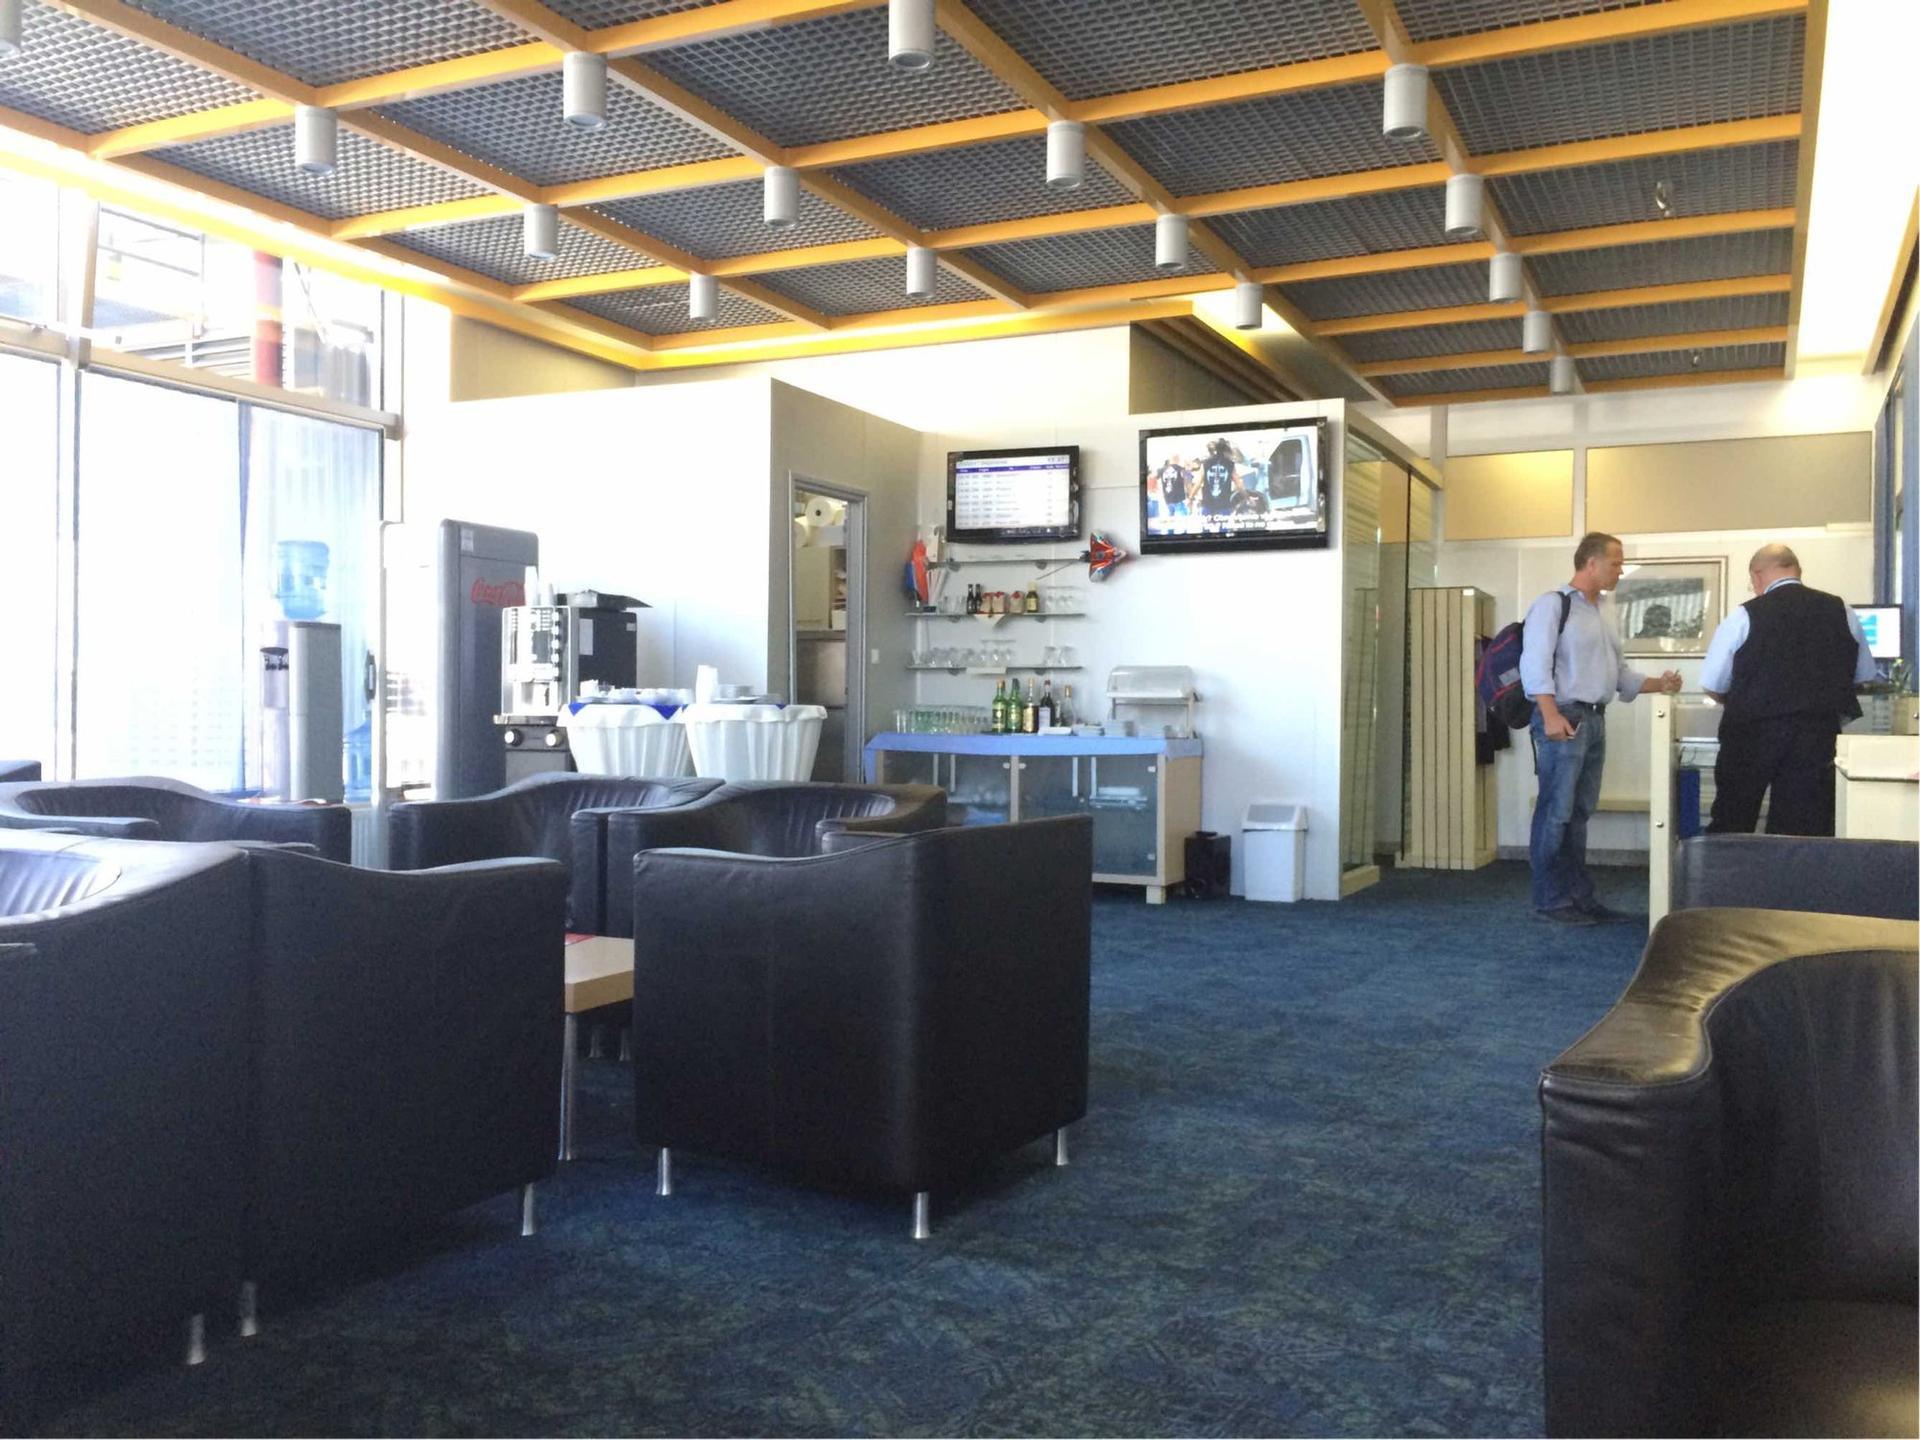 Split Airport Business Lounge image 1 of 6